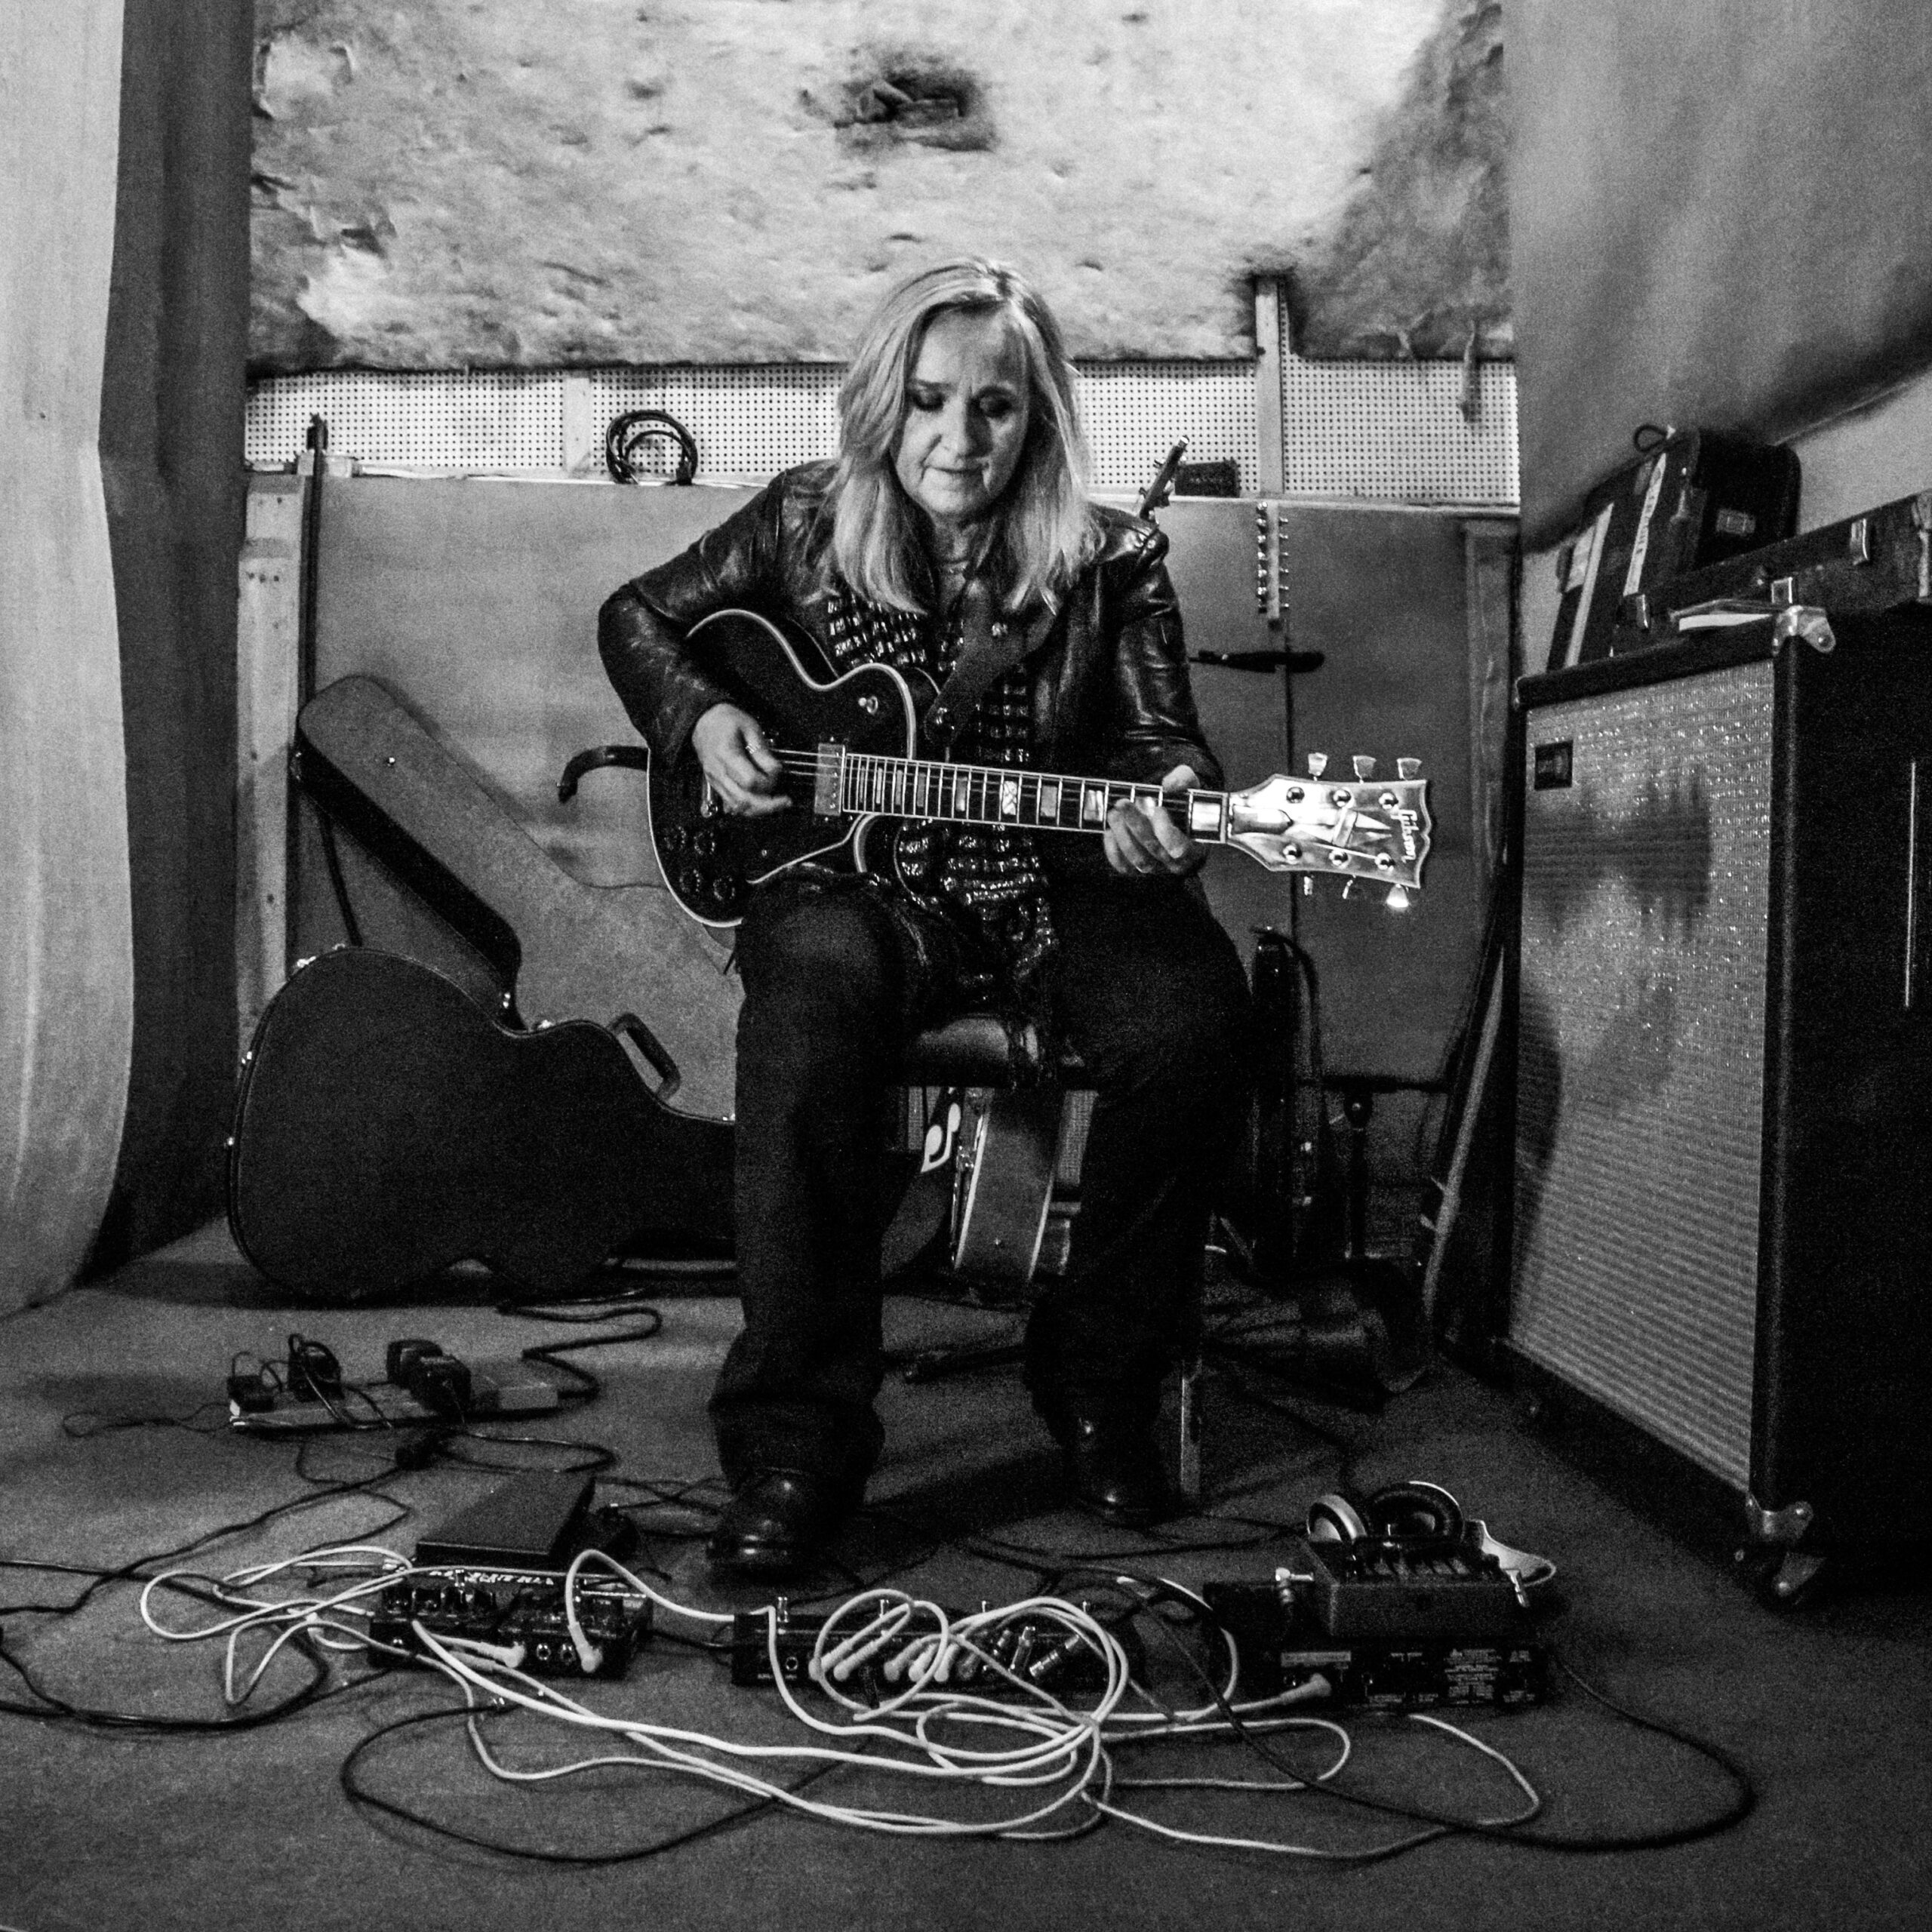 A black and white photo of Melissa Etheridge playing guitar.